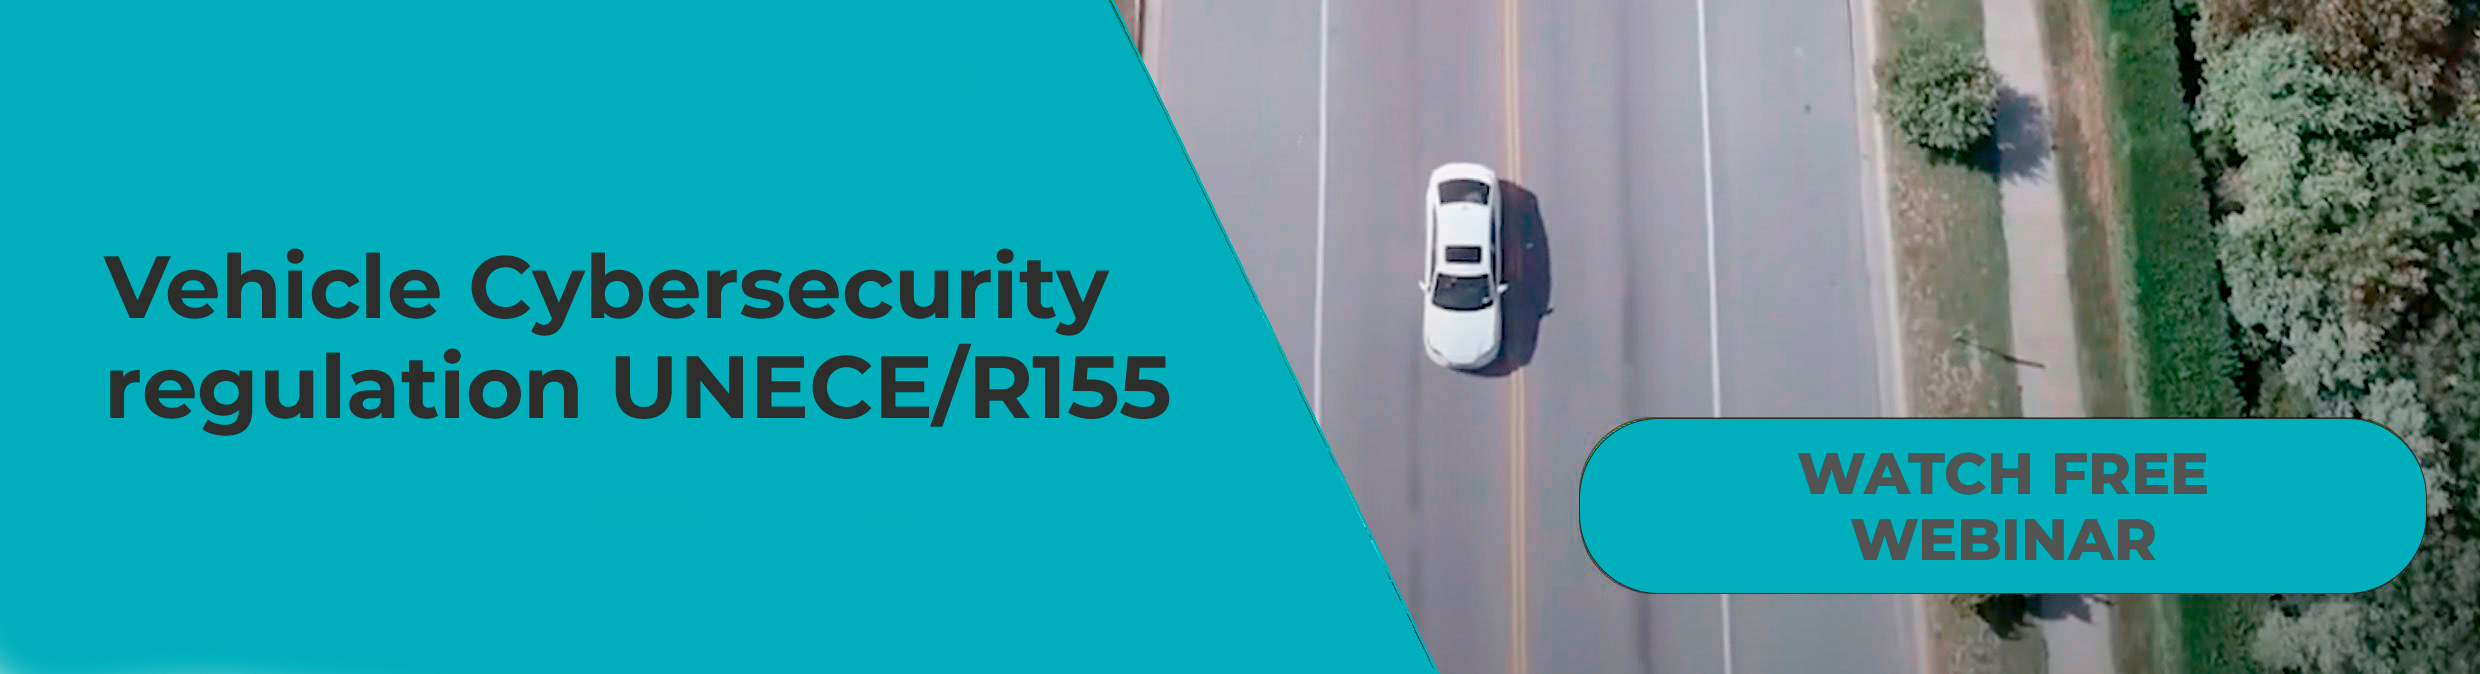 VEHICLE CYBERSECURITY REGULATION UNECE/R155 COURSE